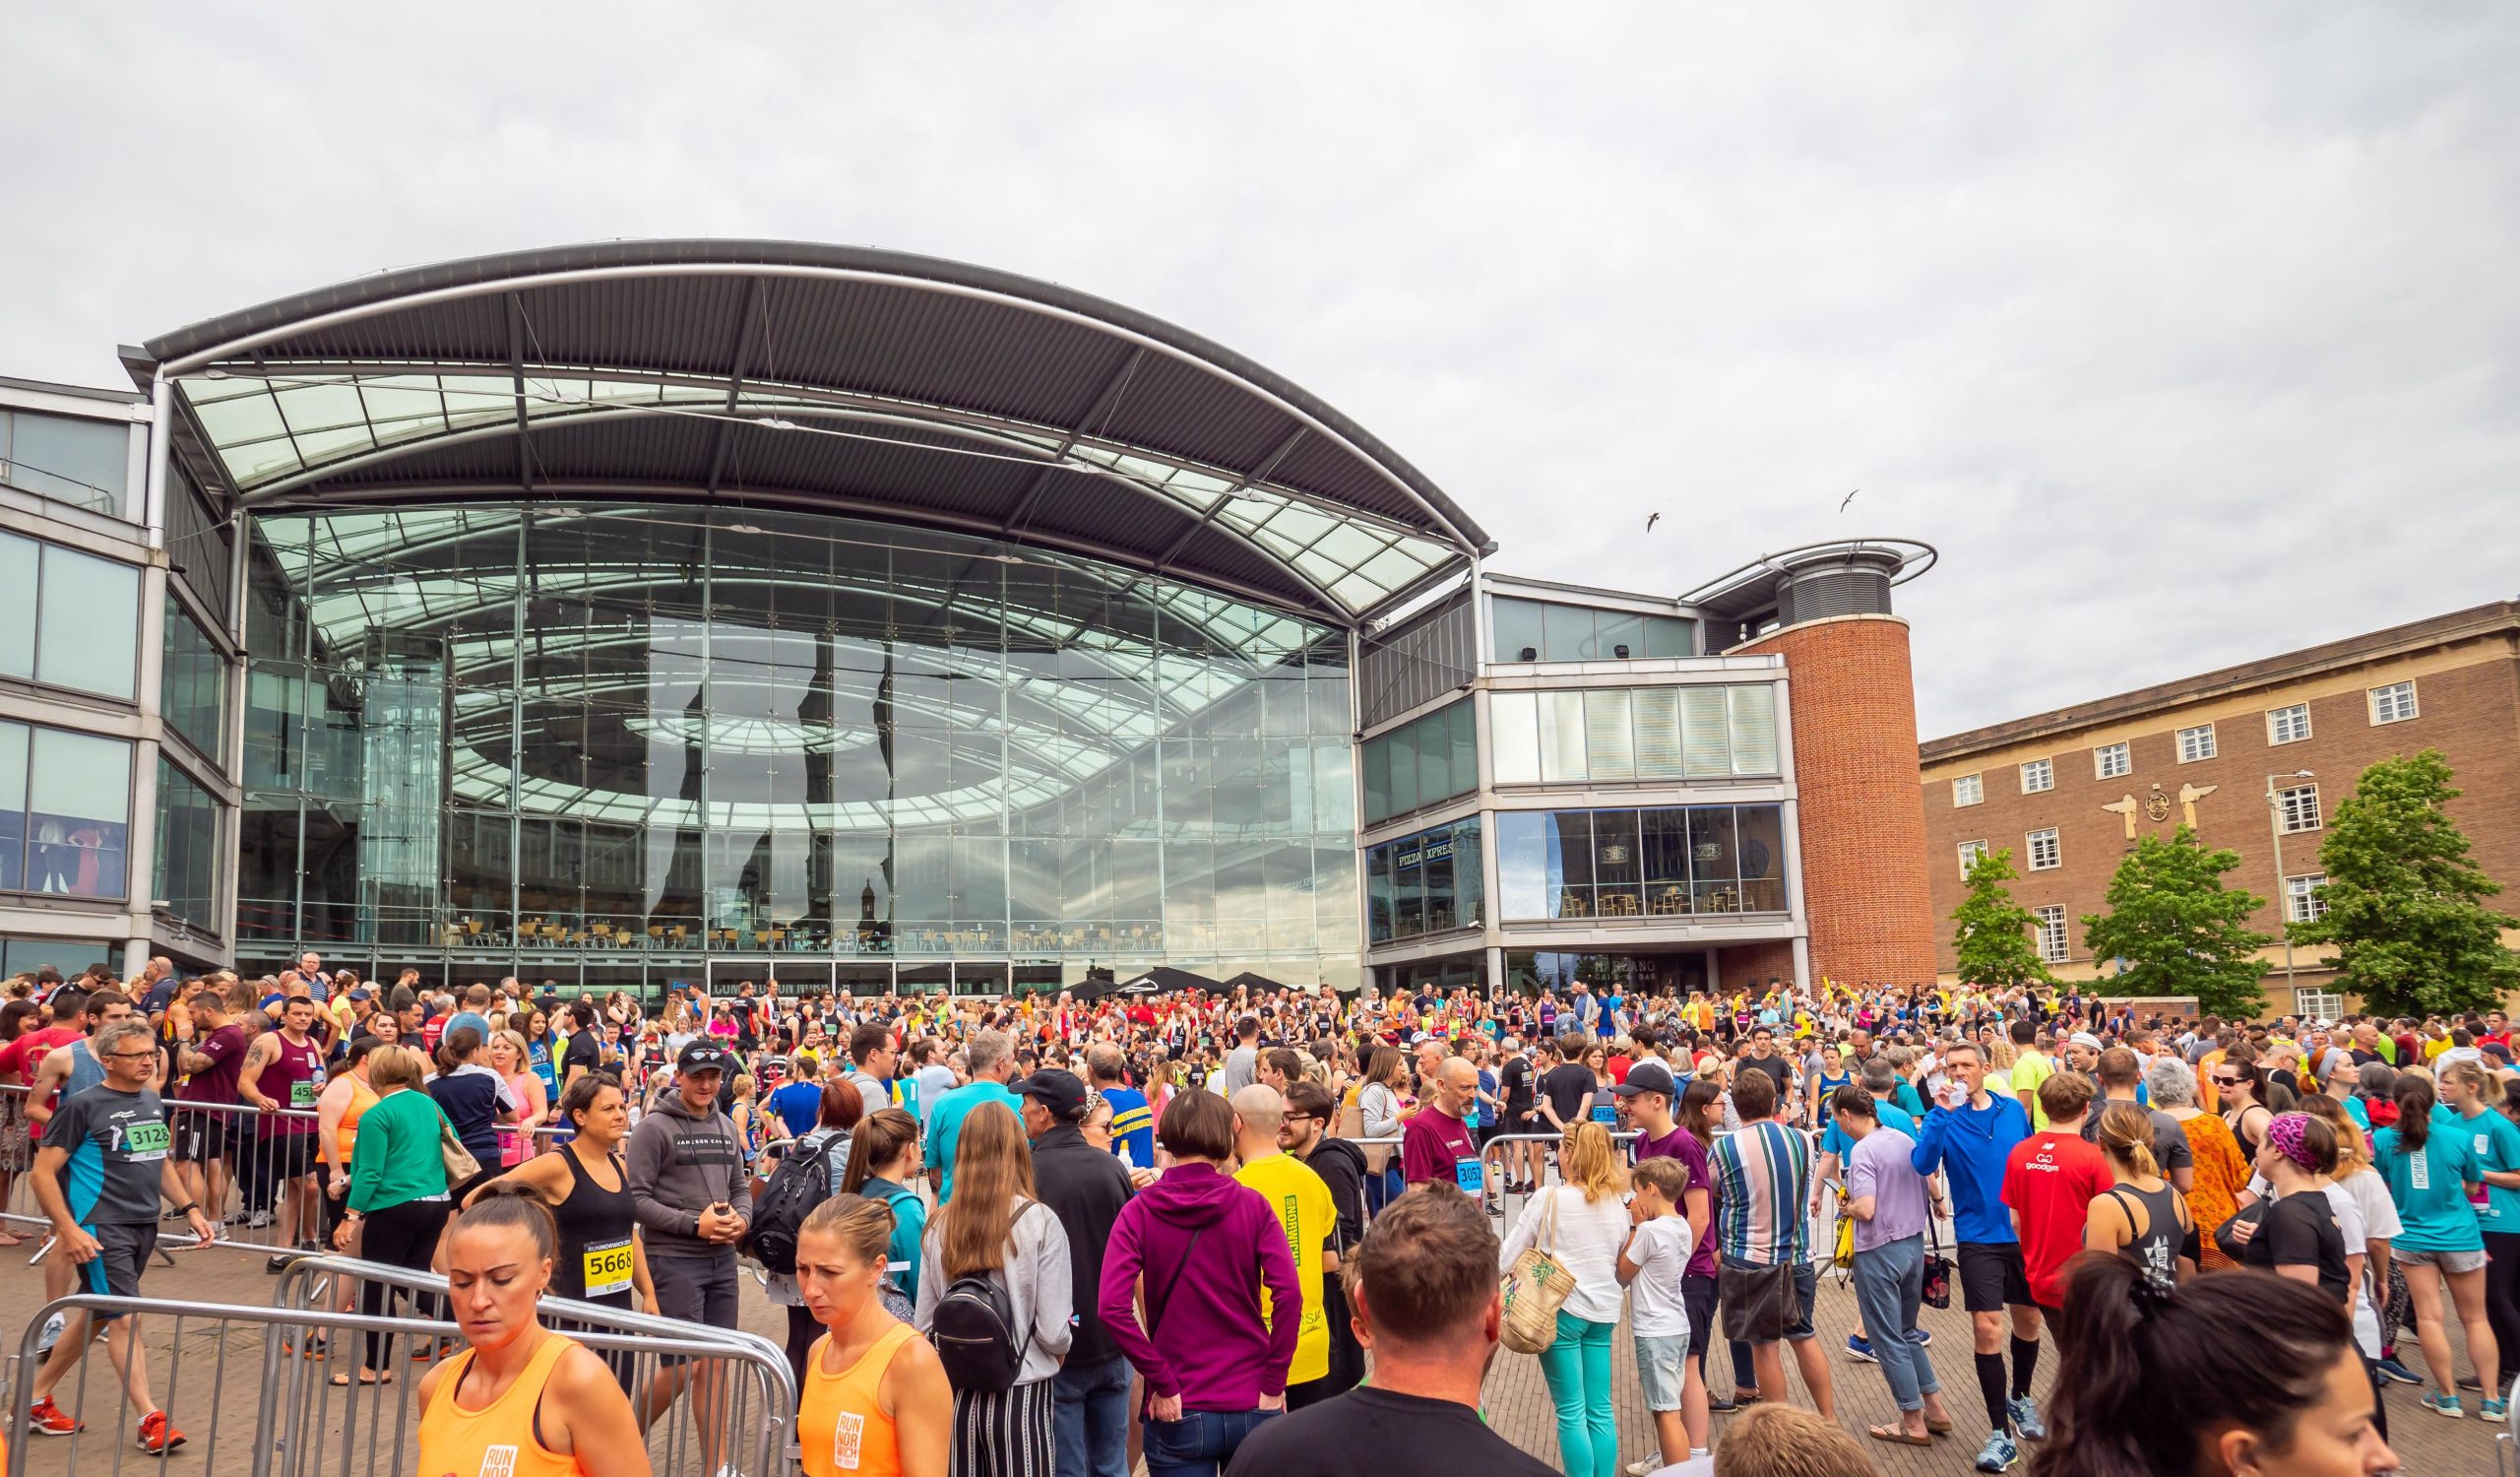 Charity delighted to be Run Norwich 2020 partner